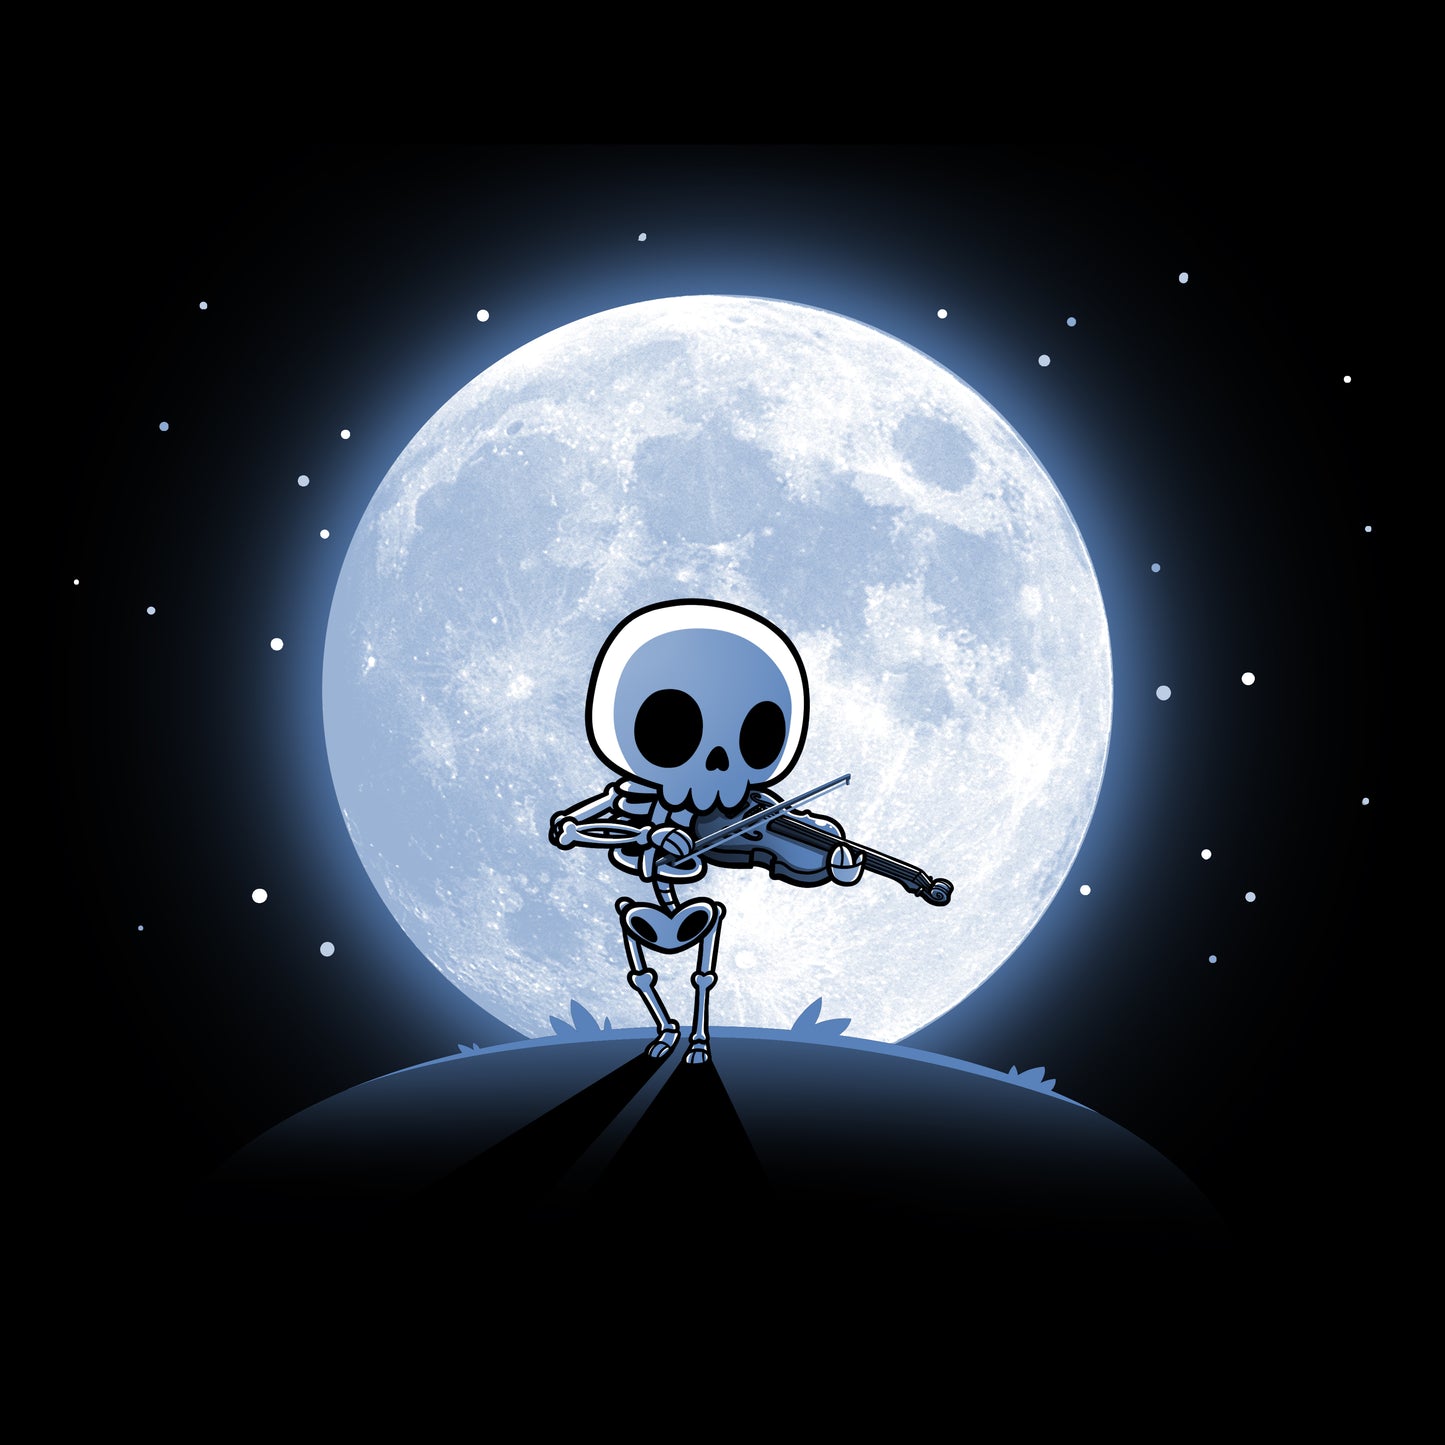 A Skulls and Soundwaves (Glow) t-shirt by TeeTurtle featuring the moon's most magical maestro, a skeleton holding a violin.